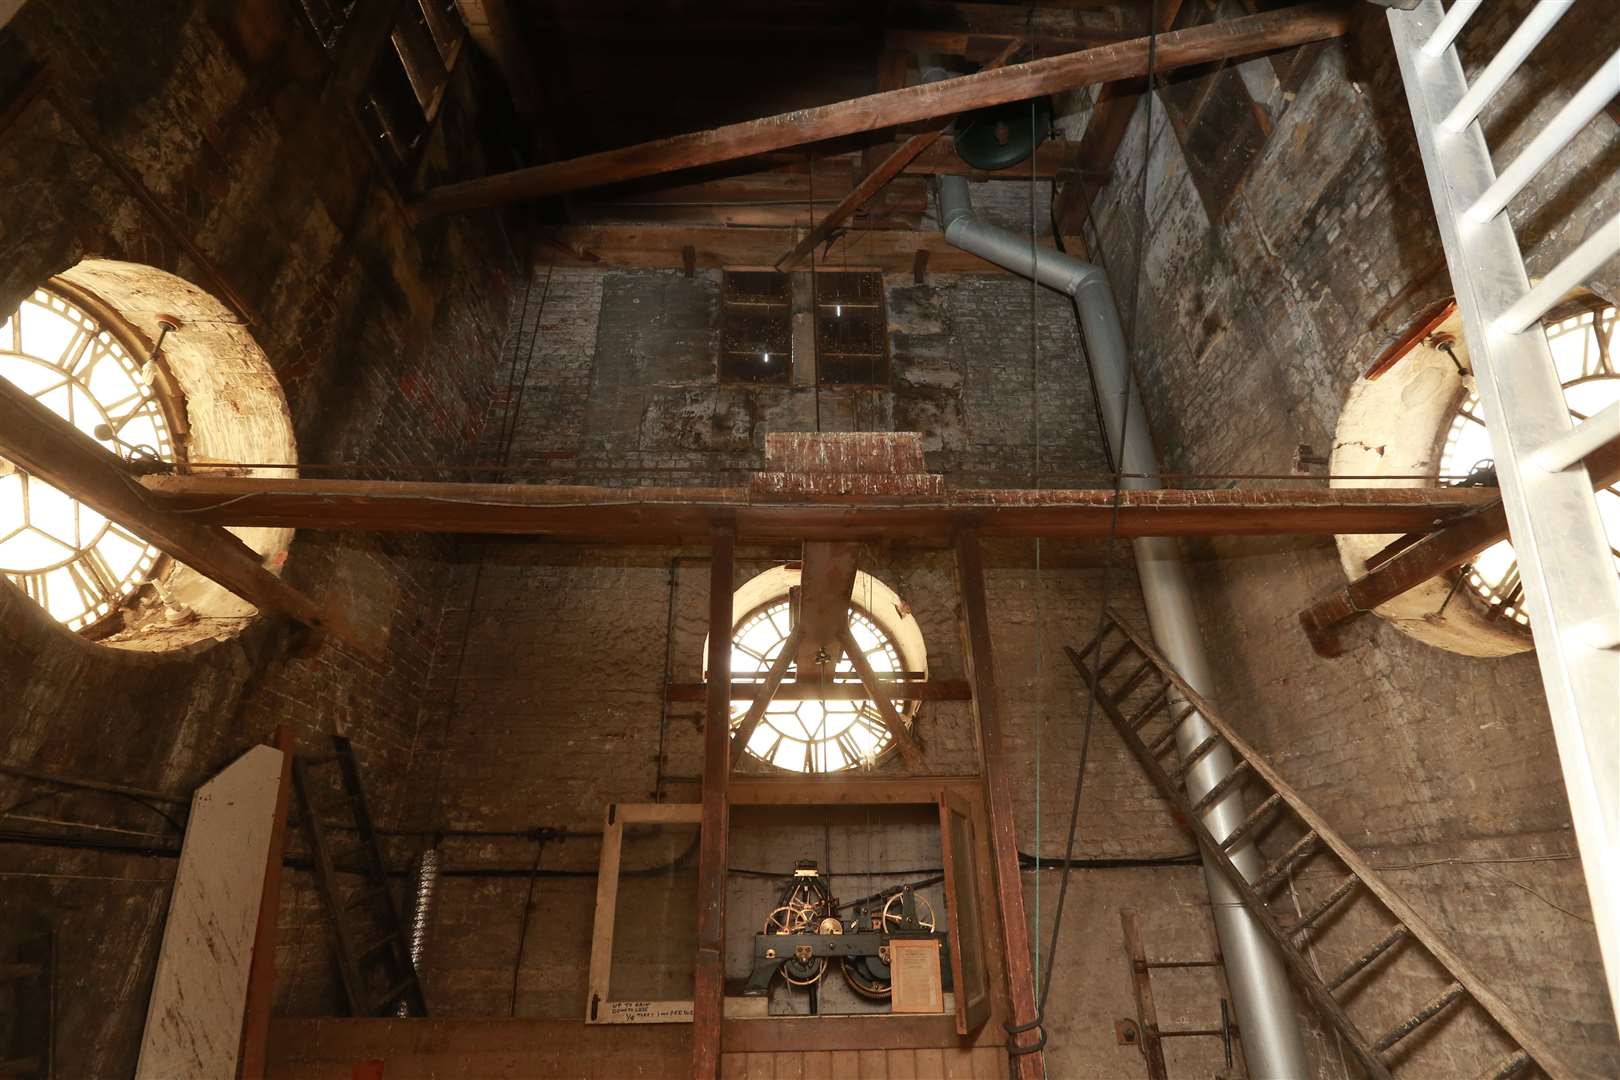 Inside the clock tower before its renovation